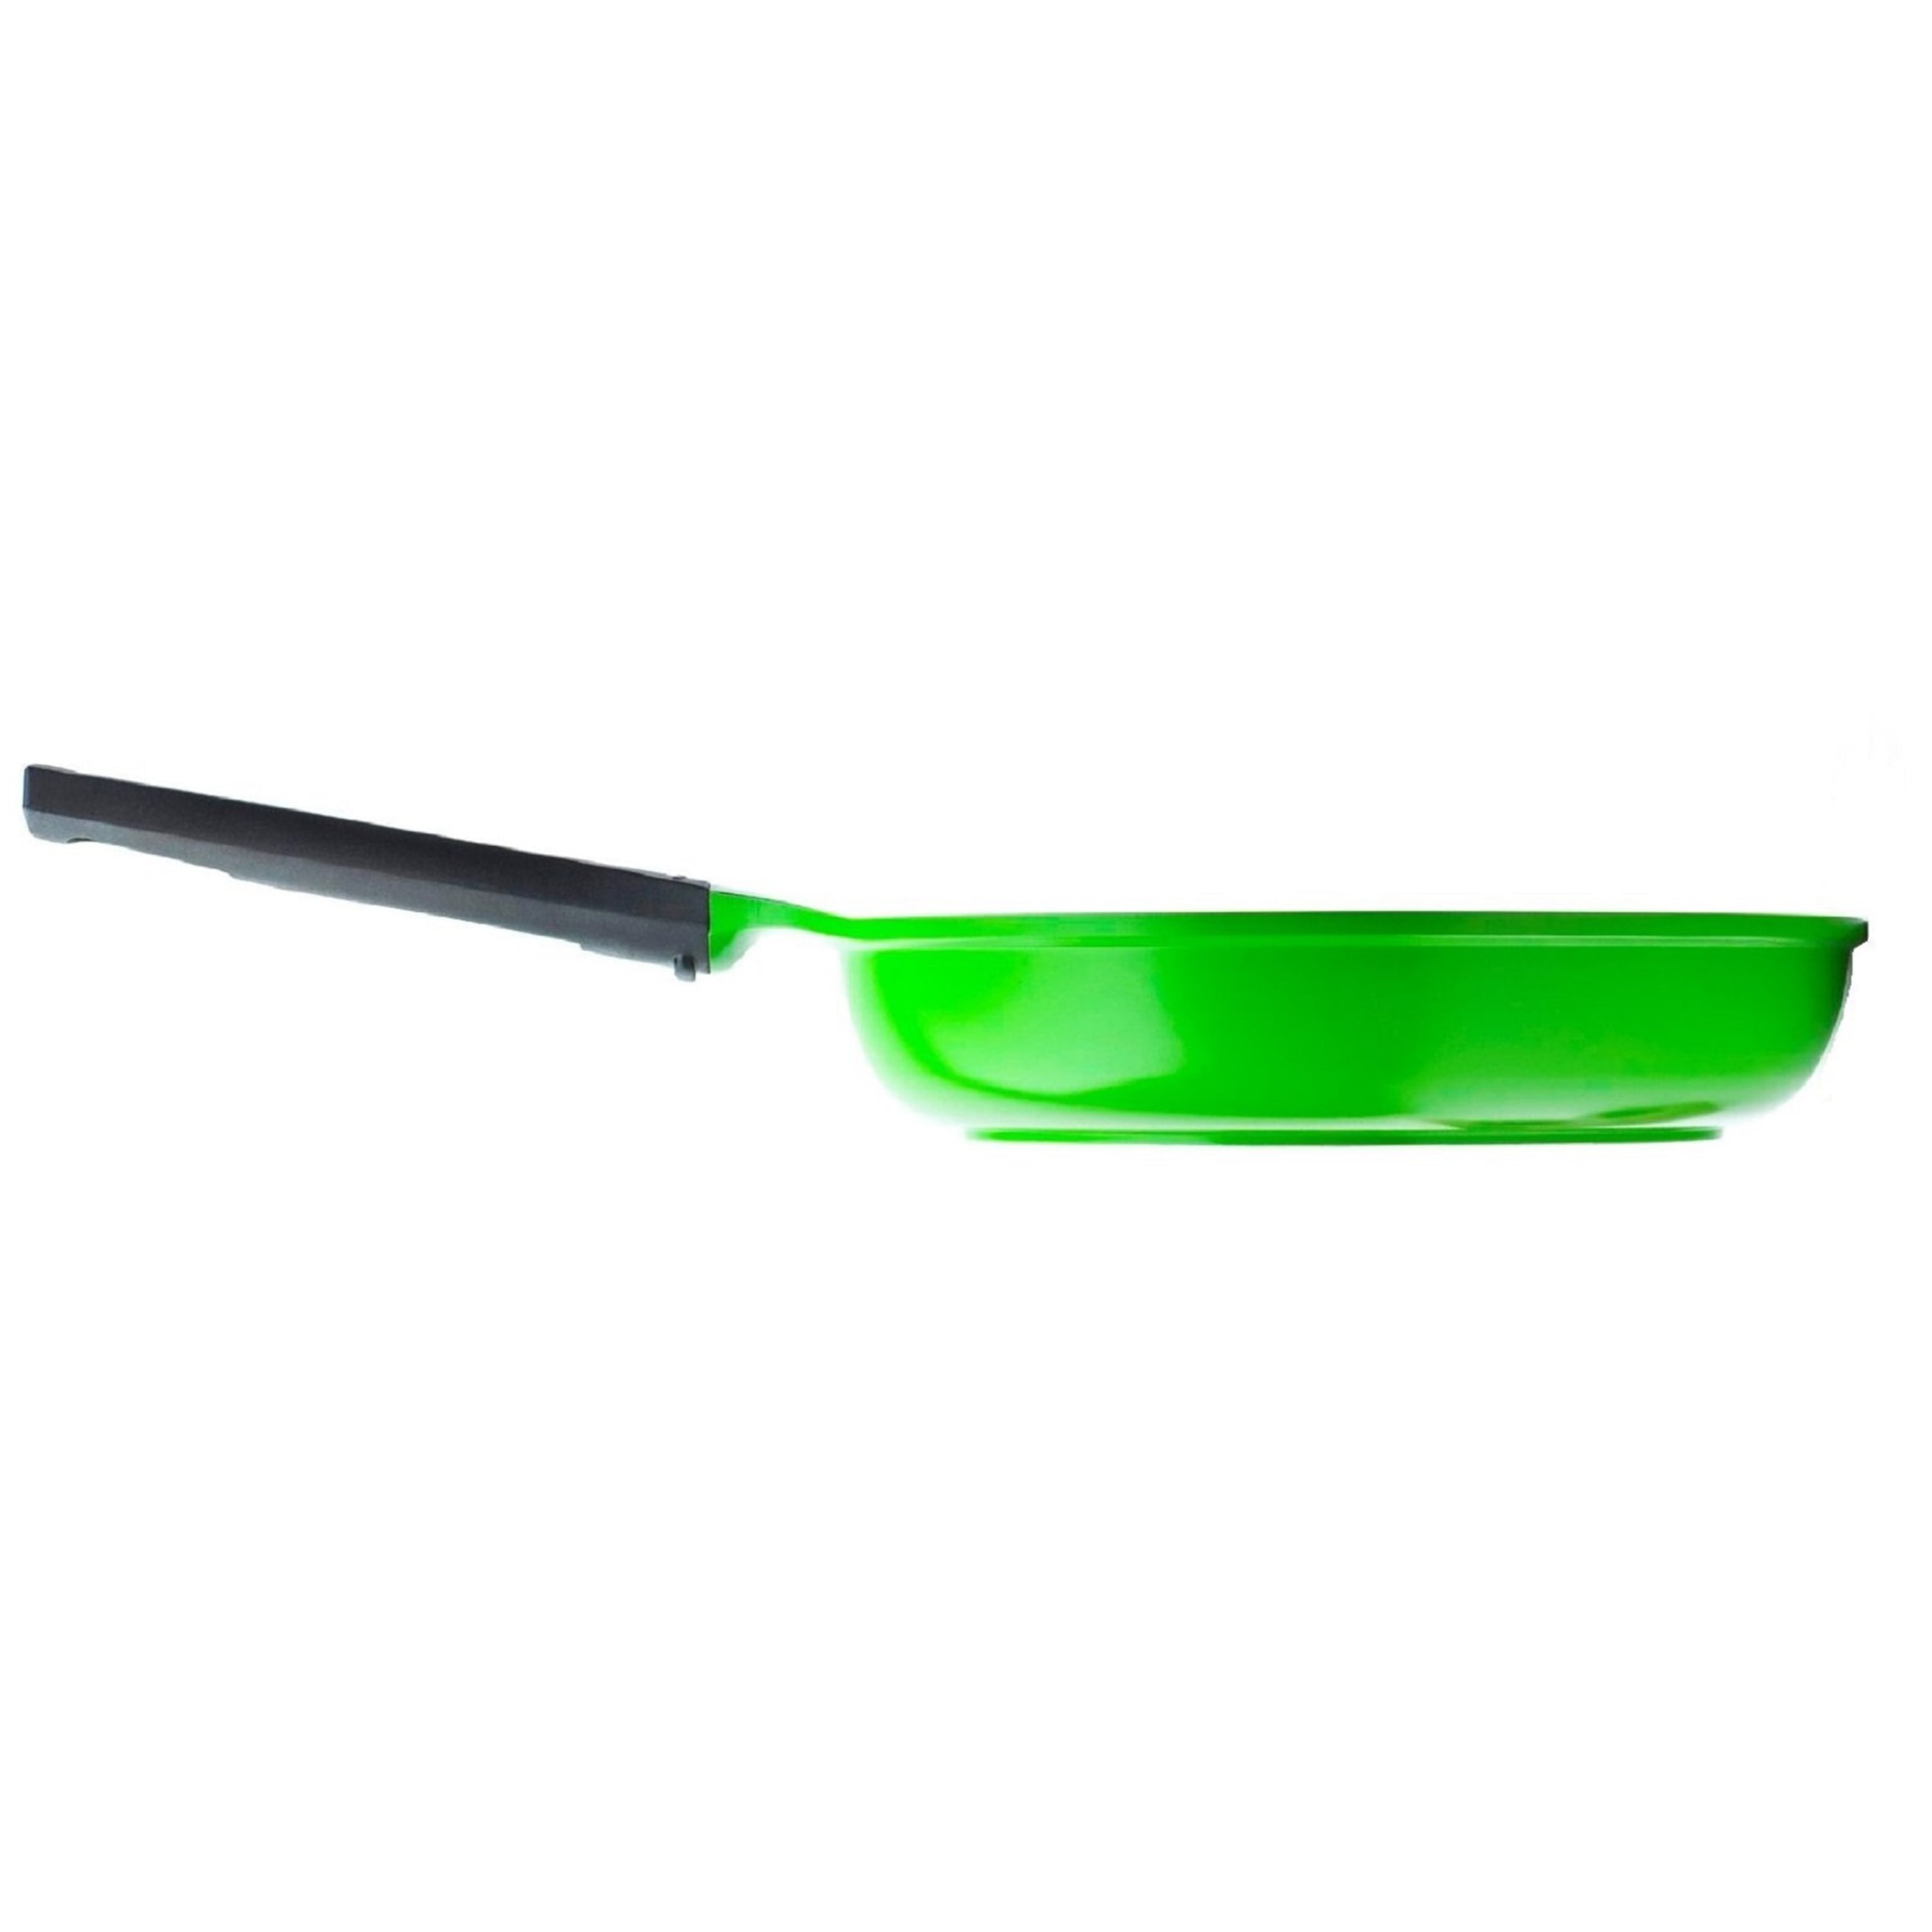 12 Green Earth Wok by Ozeri, with Smooth Ceramic Non-Stick Coating (100%  PTFE & PFOA Free), 1 - Ralphs